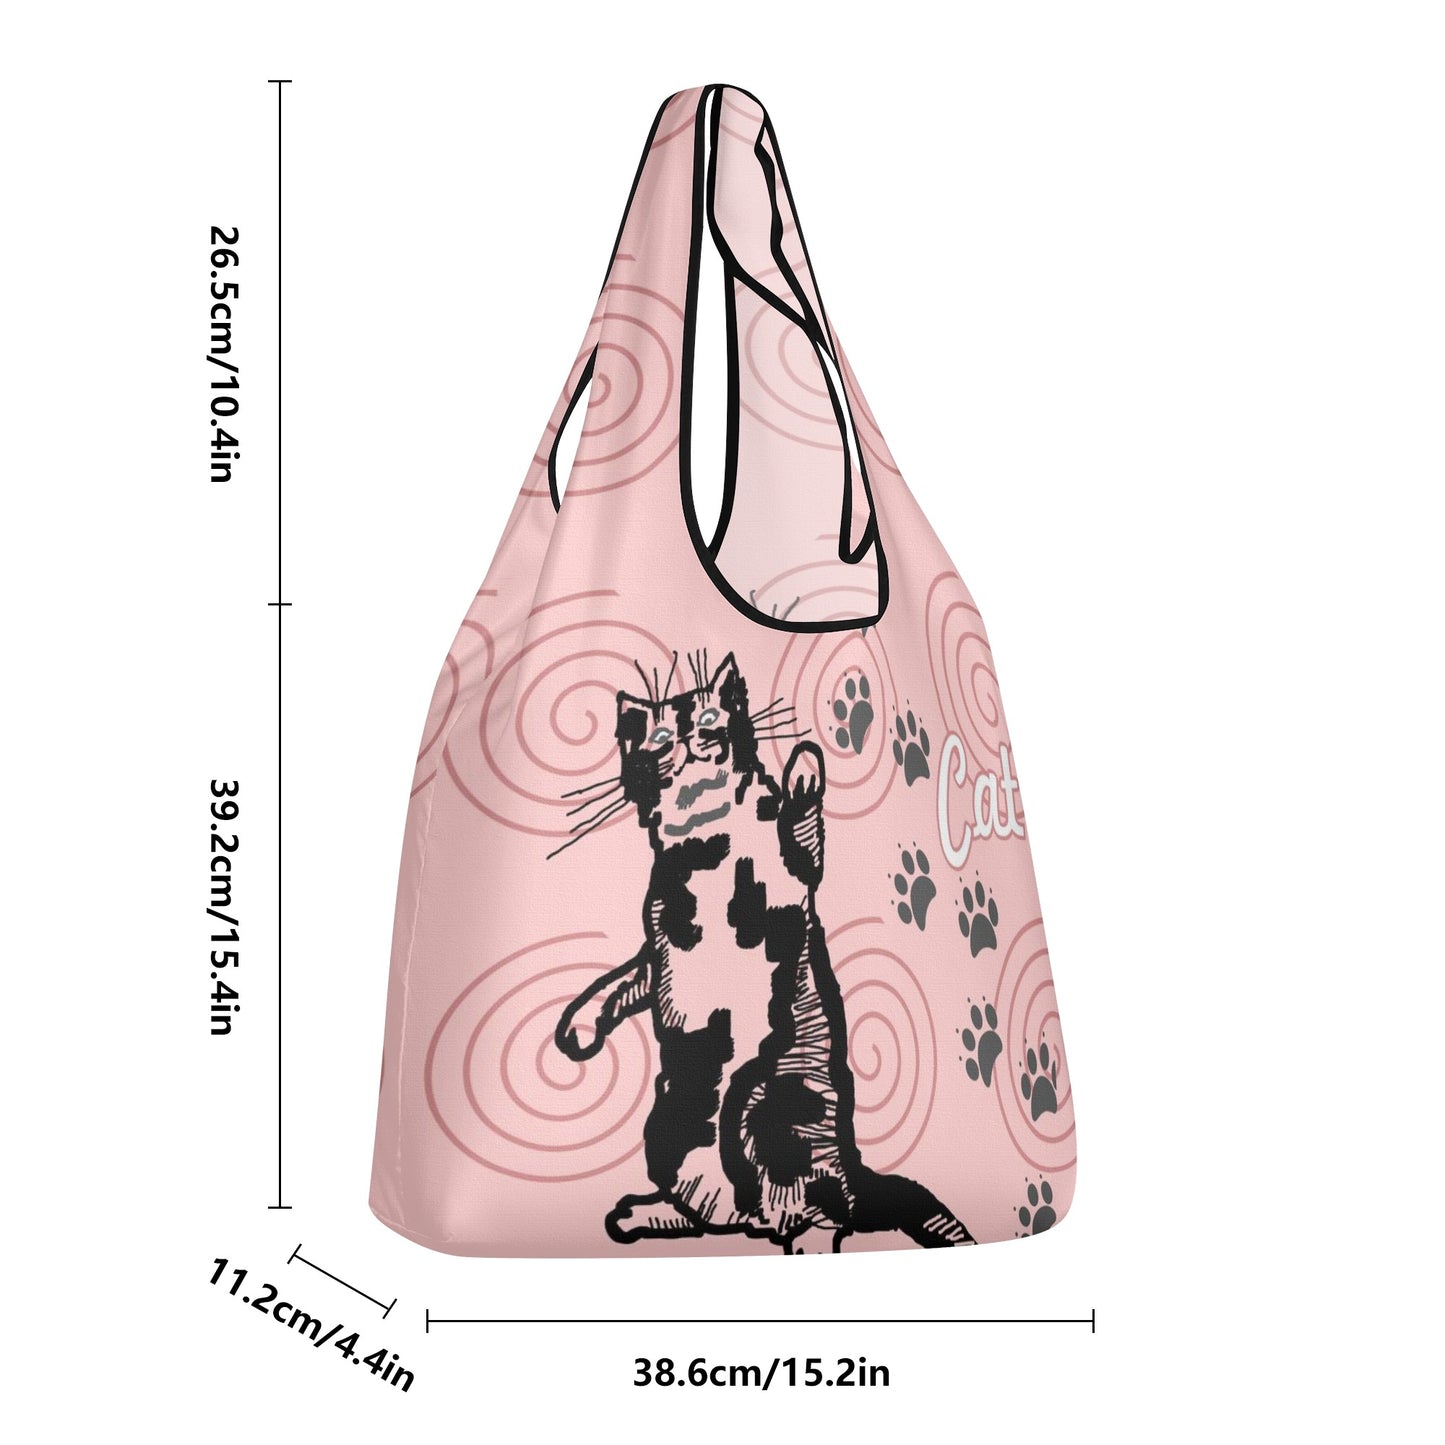 Cat Love Reuseable 3 Pack of Grocery Bags